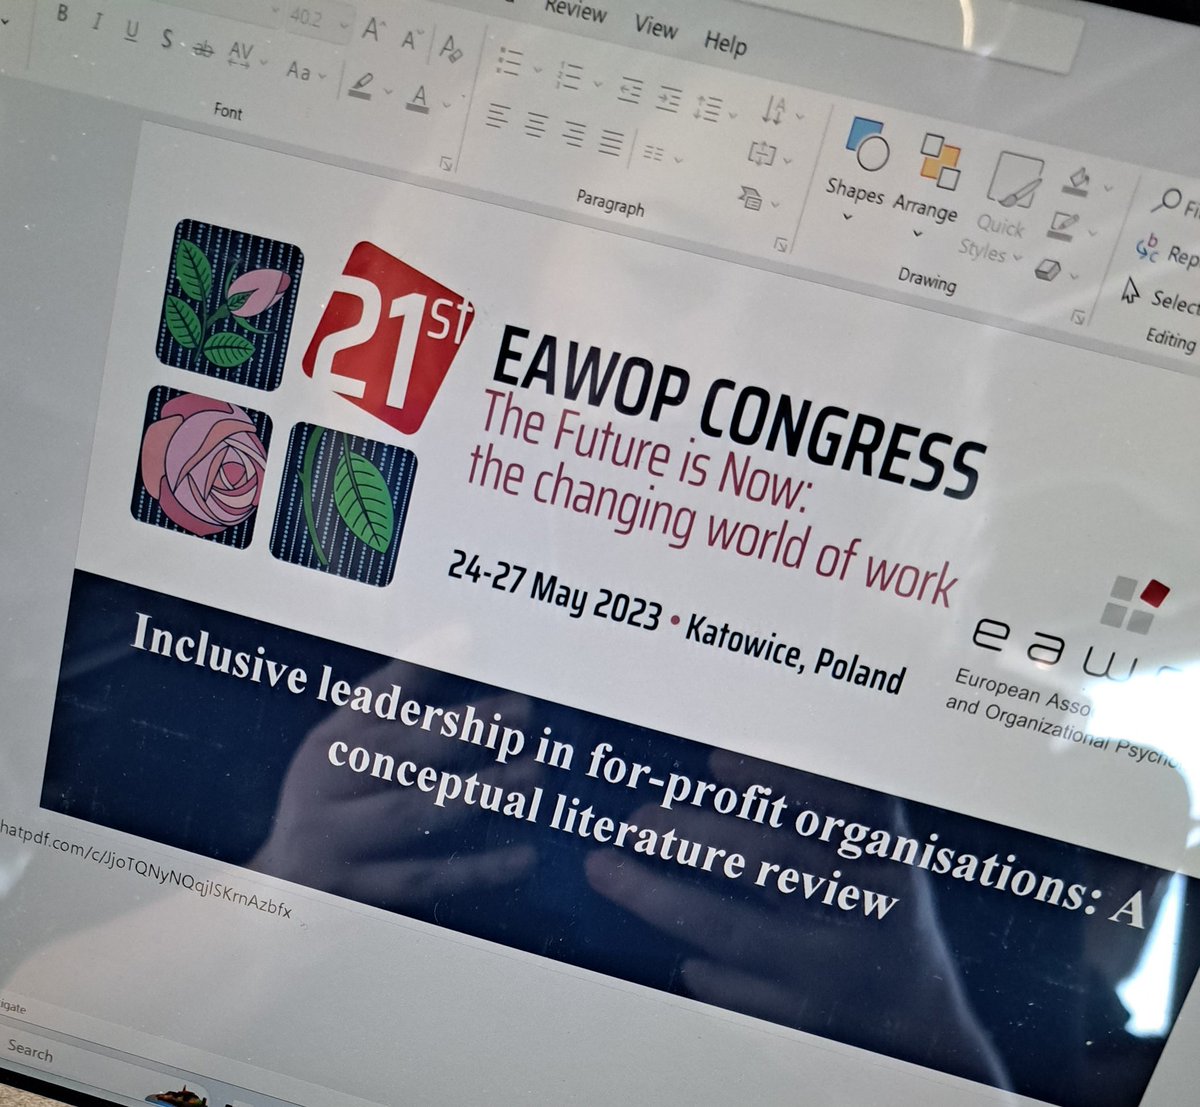 I am very excited to nerd out at #EAWOPCongress 'The Future is Now: changing the world of work' and to present my paper on #InclusiveLeadership, the first piece of work for my PhD.

#EAWOP23 #EAWOP2023 #EAWOPCongress